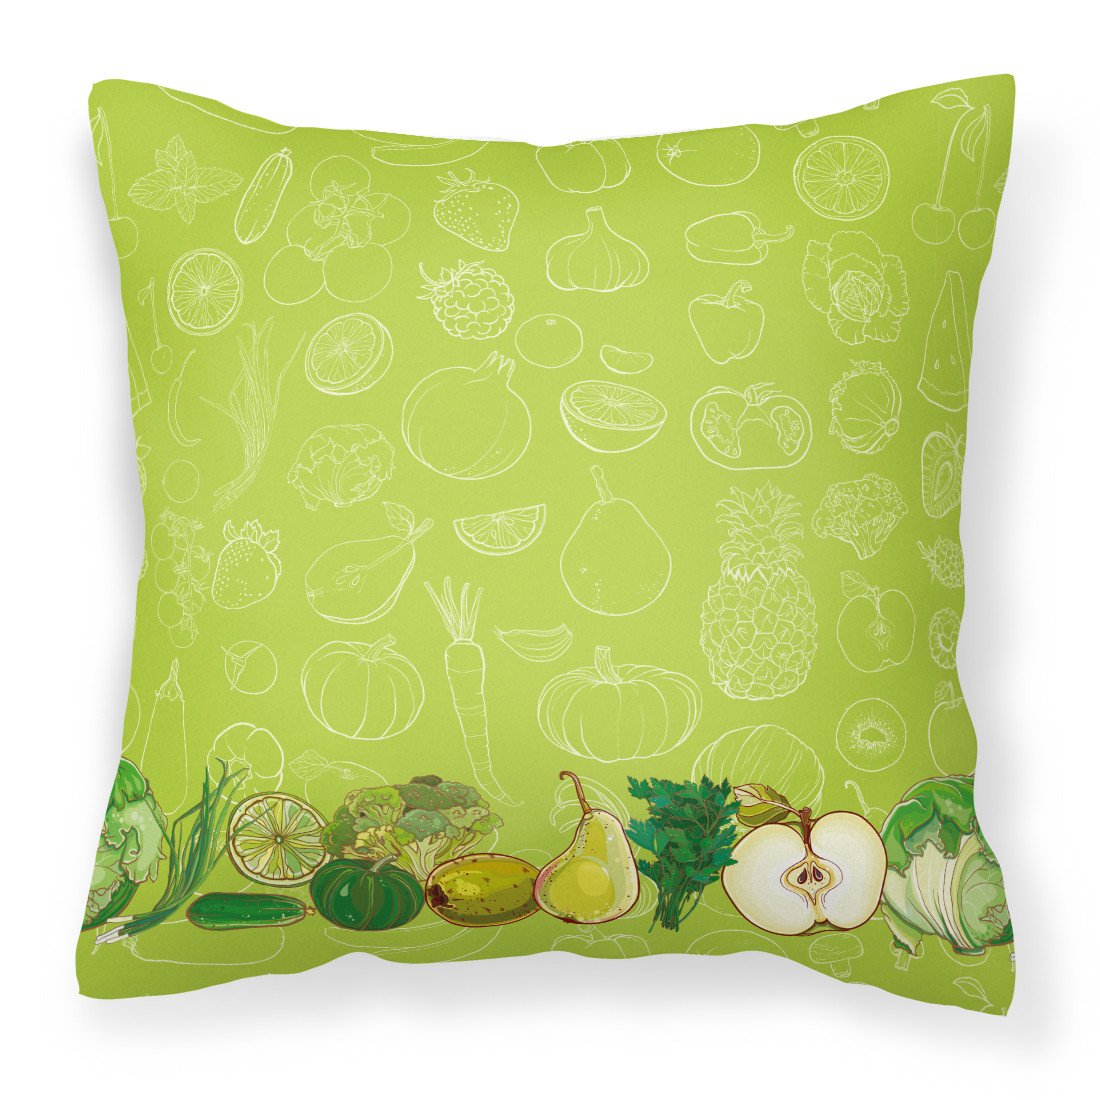 Fruits and Vegetables in Green Fabric Decorative Pillow BB5135PW1818 by Caroline's Treasures